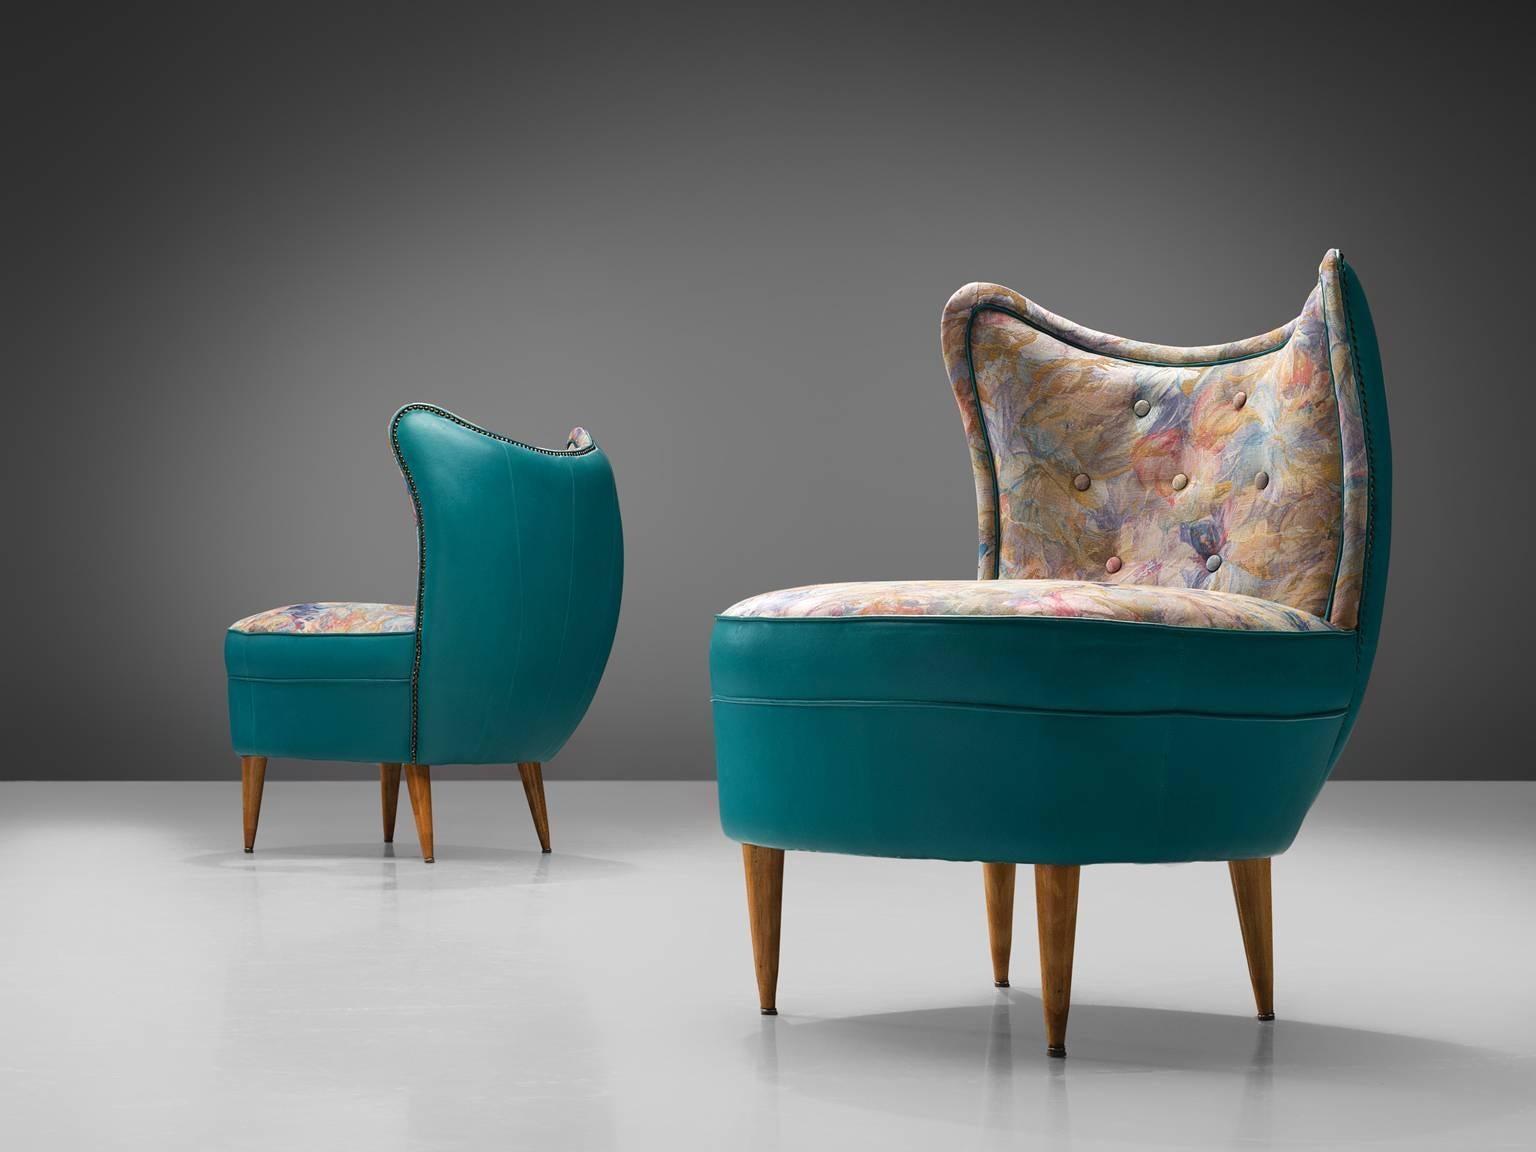 Sofa, turquoise leatherette, fabric, wood, Italy, 1950s.

This set of easy chairs show traits of the design by the Italian designer Veronesi. The quirky set is elegant and frivolous and is completely rounded when seen from behind. The pieces